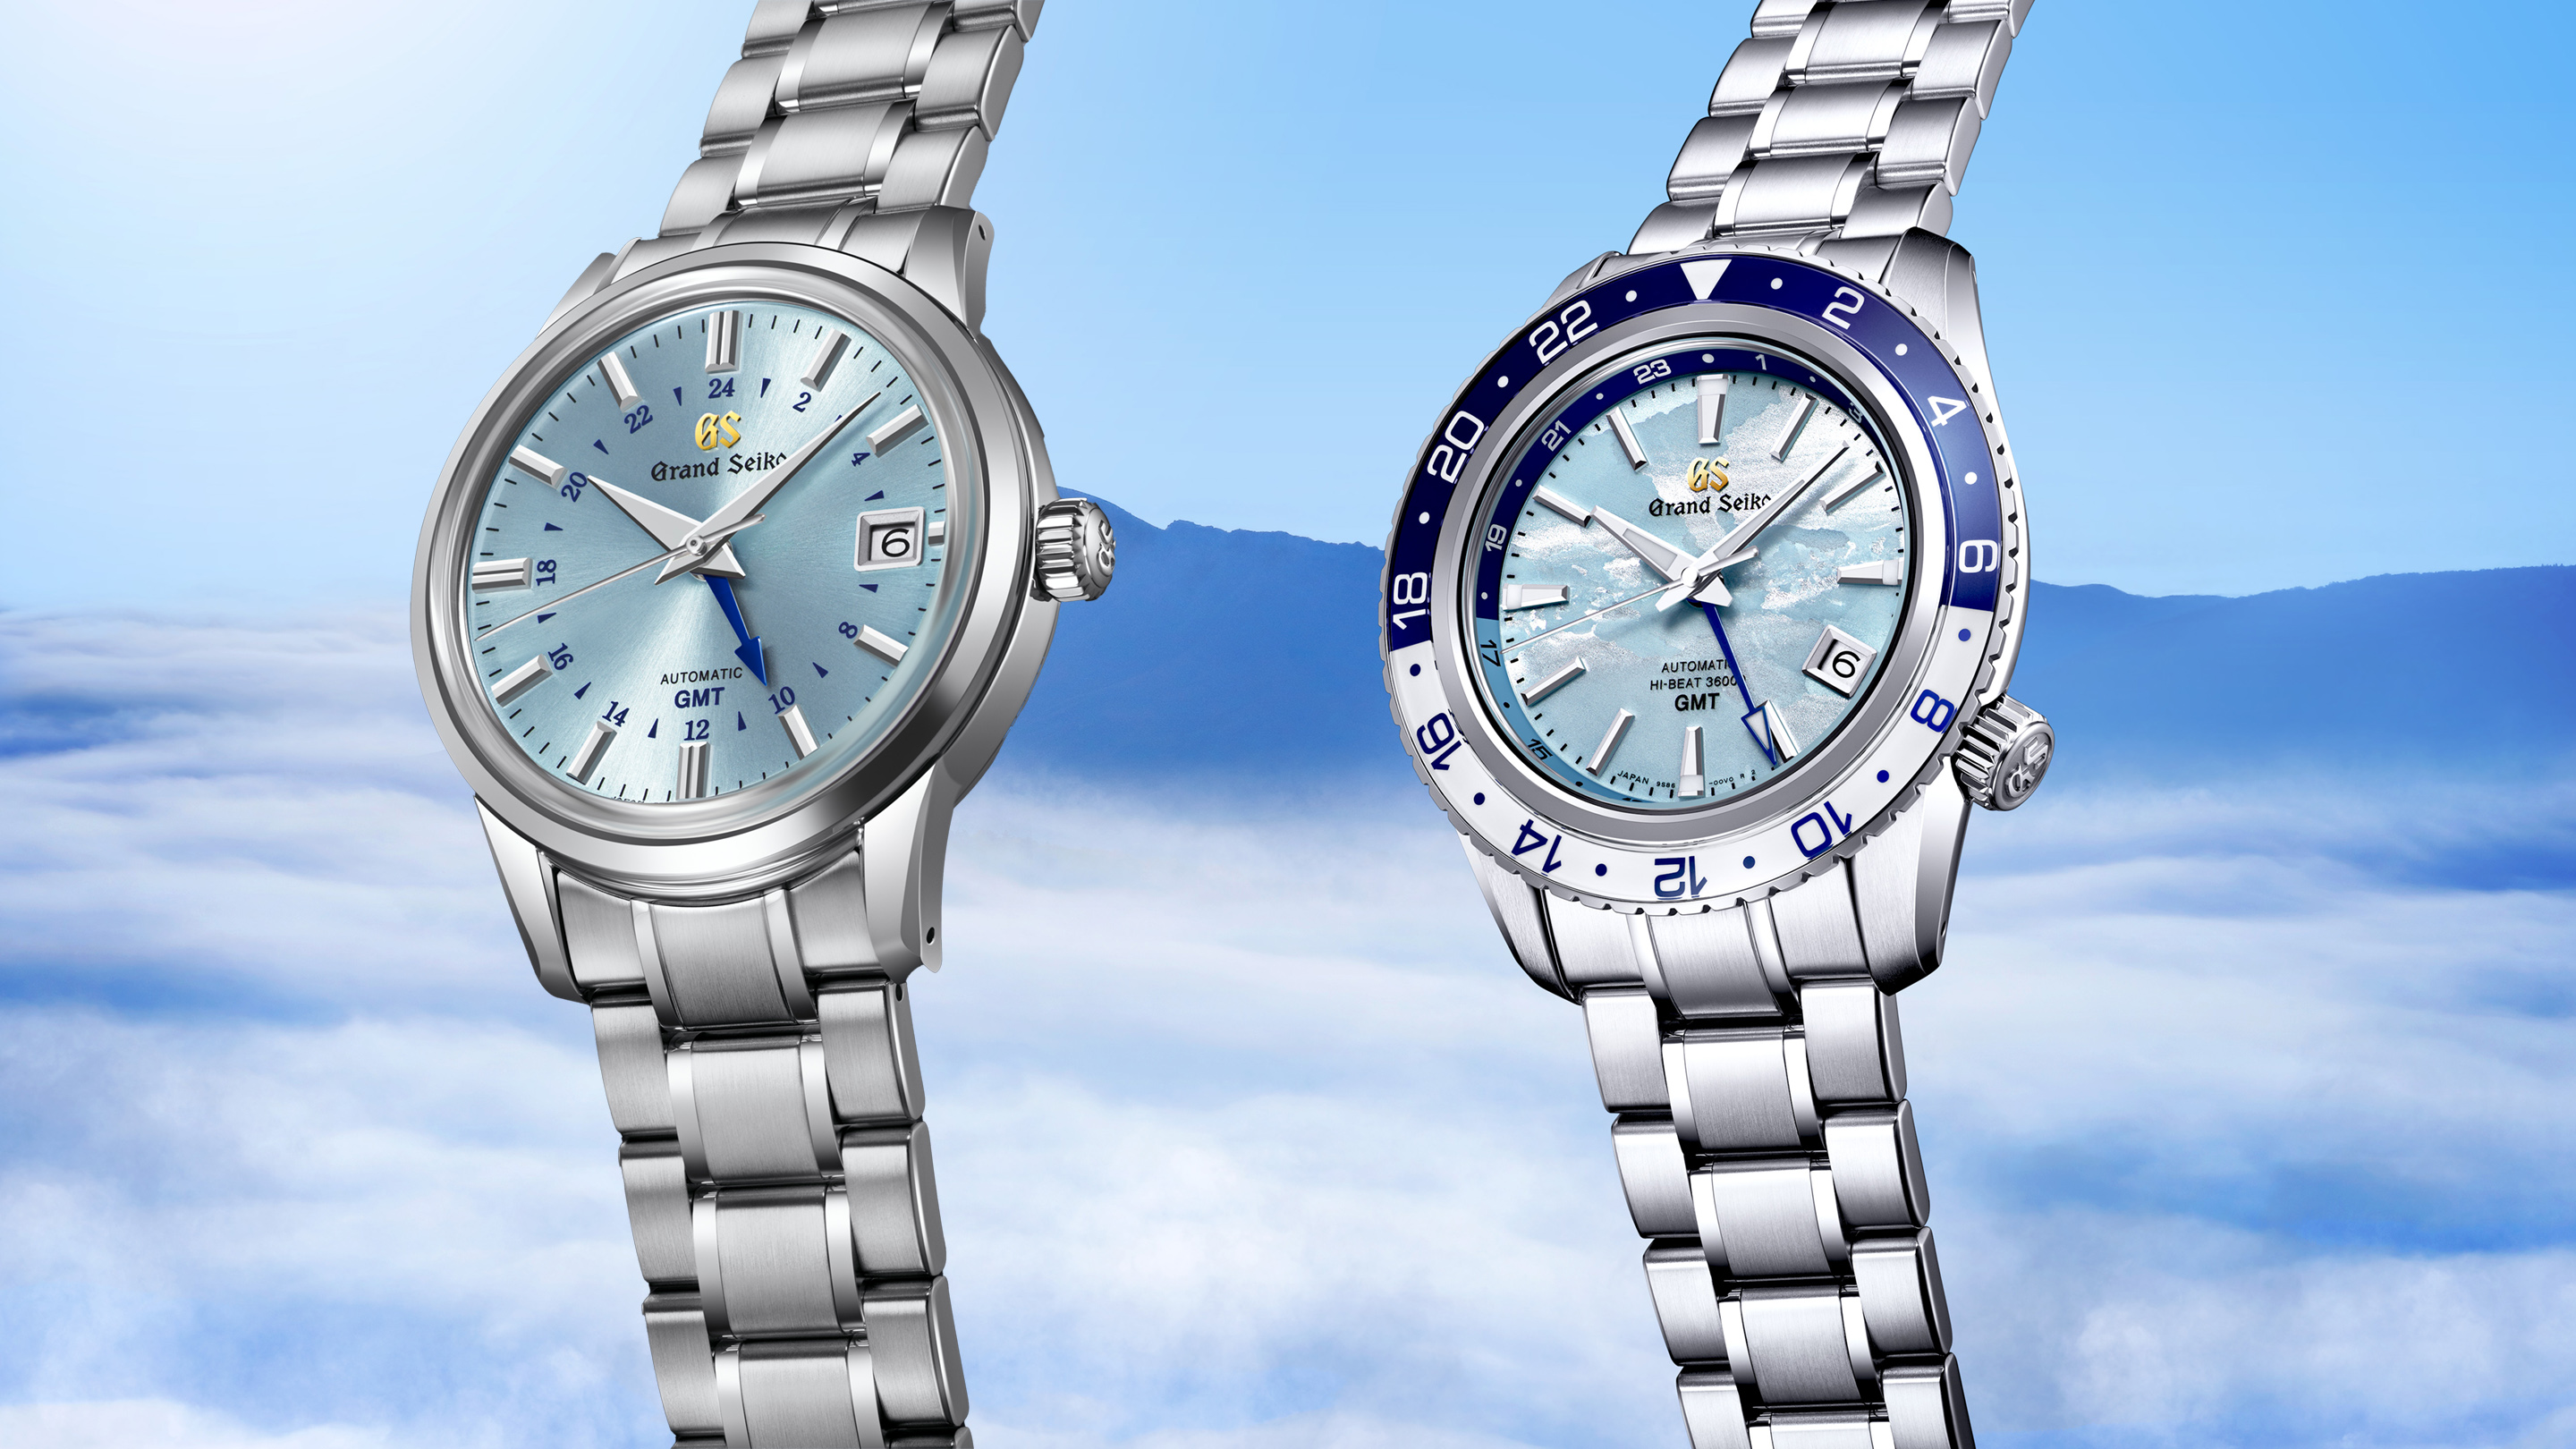 Introducing Two New Limited Edition Grand Seiko GMT